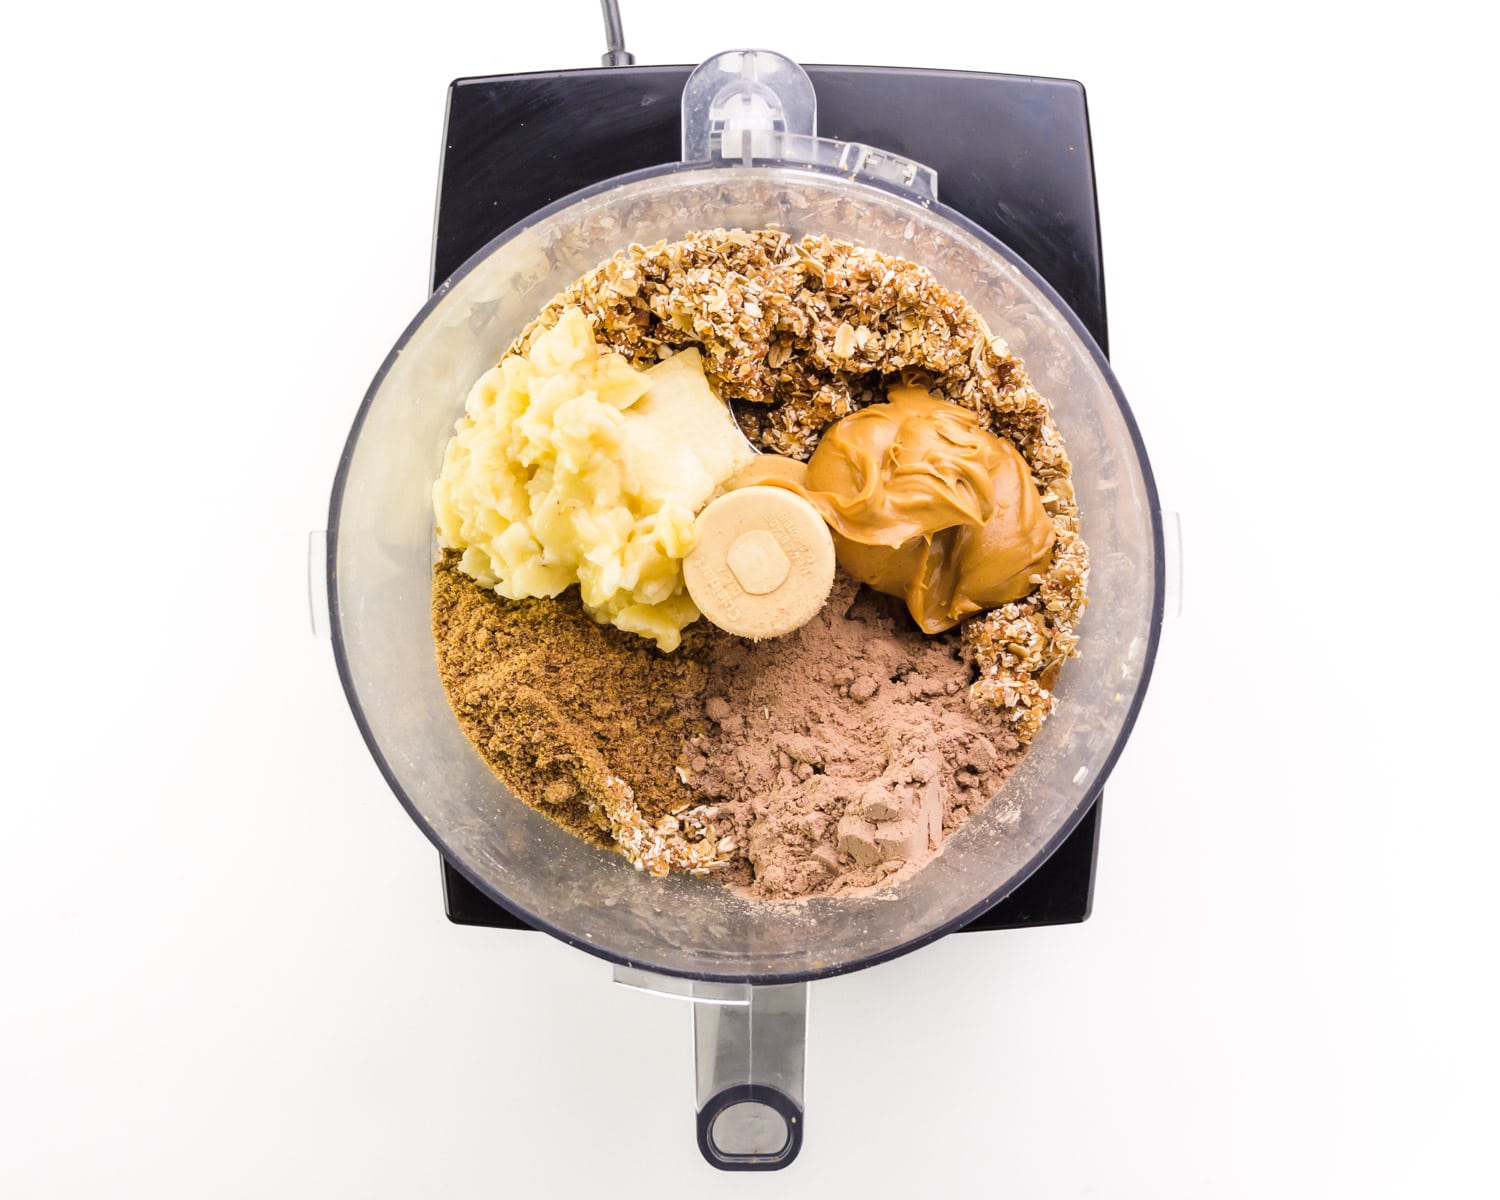 Ingredients are in a food processor, including peanut butter and mashed bananas.